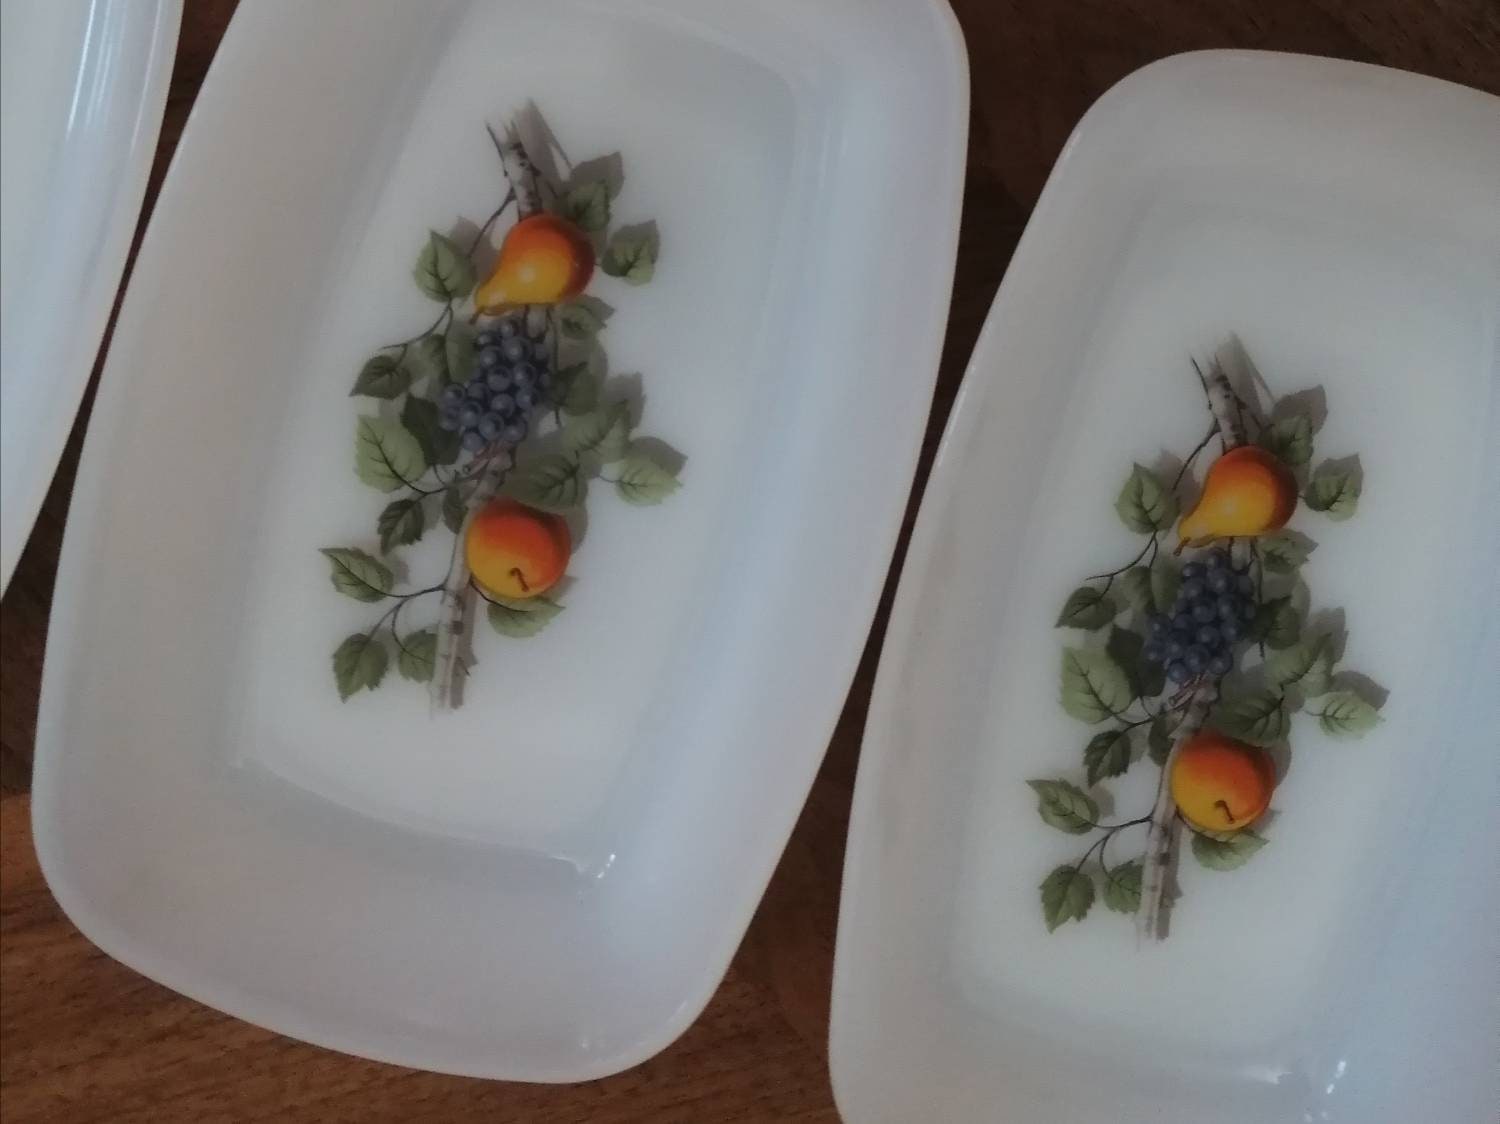 Does anyone collect Arcopal France? I bought these plates but cannot find  any info about the pattern. I can't really find any articles about  collecting Arcopal. (It's fun collecting non-pyrex since it's